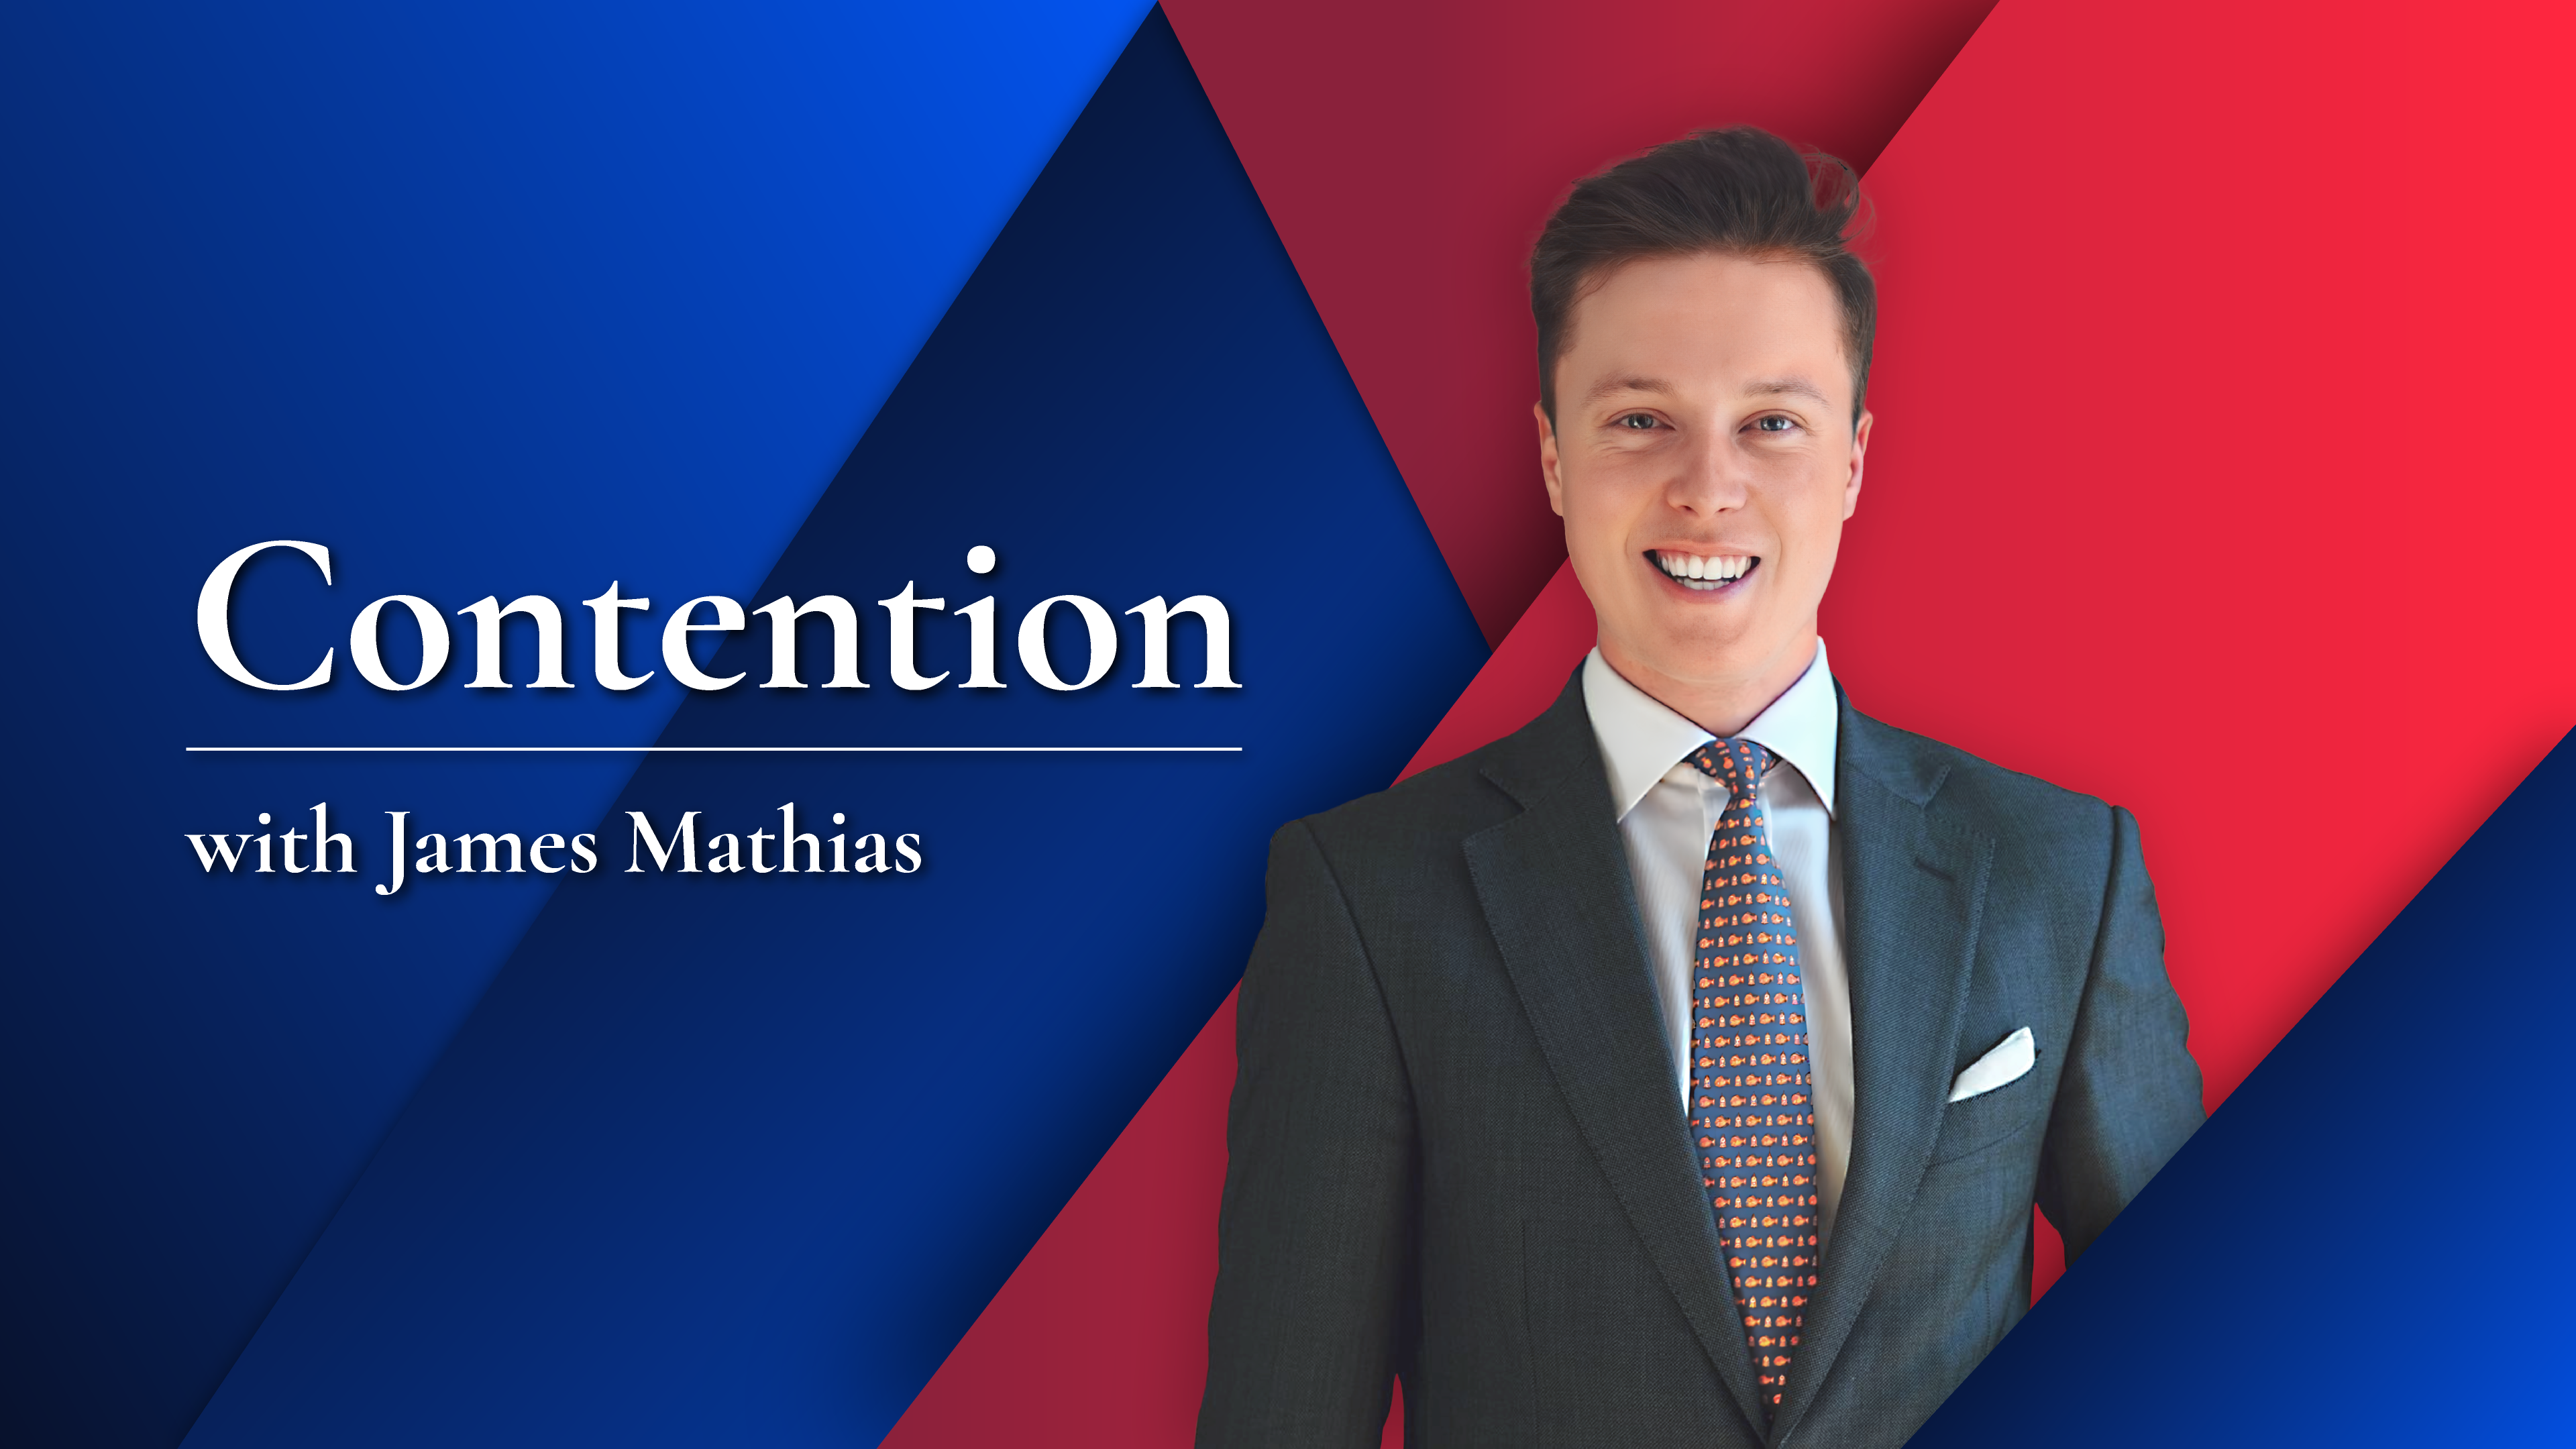 Contention with James Mathias